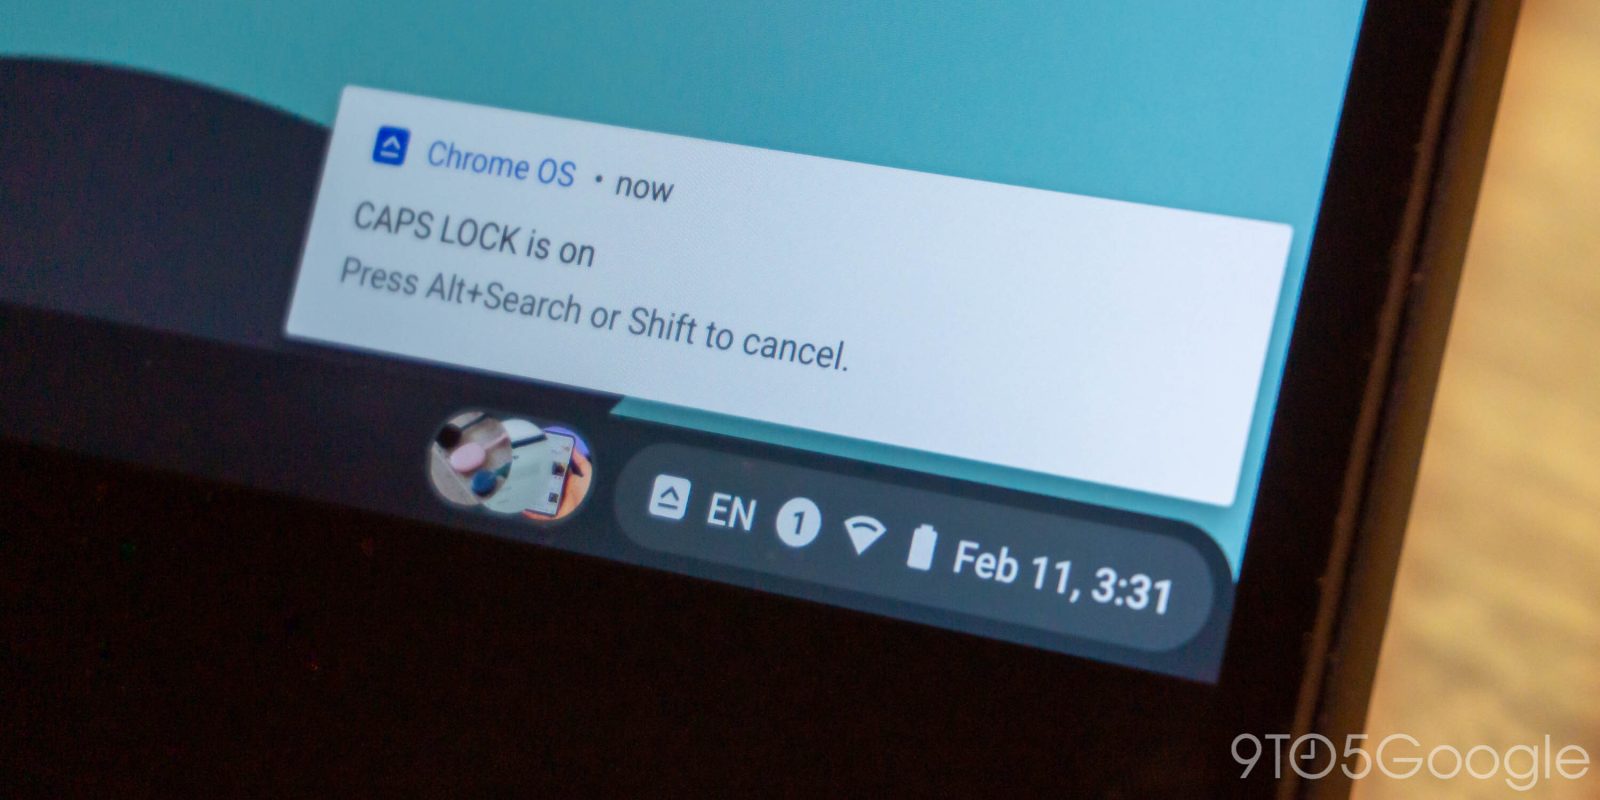 Chrome OS date and notification icons in shelf